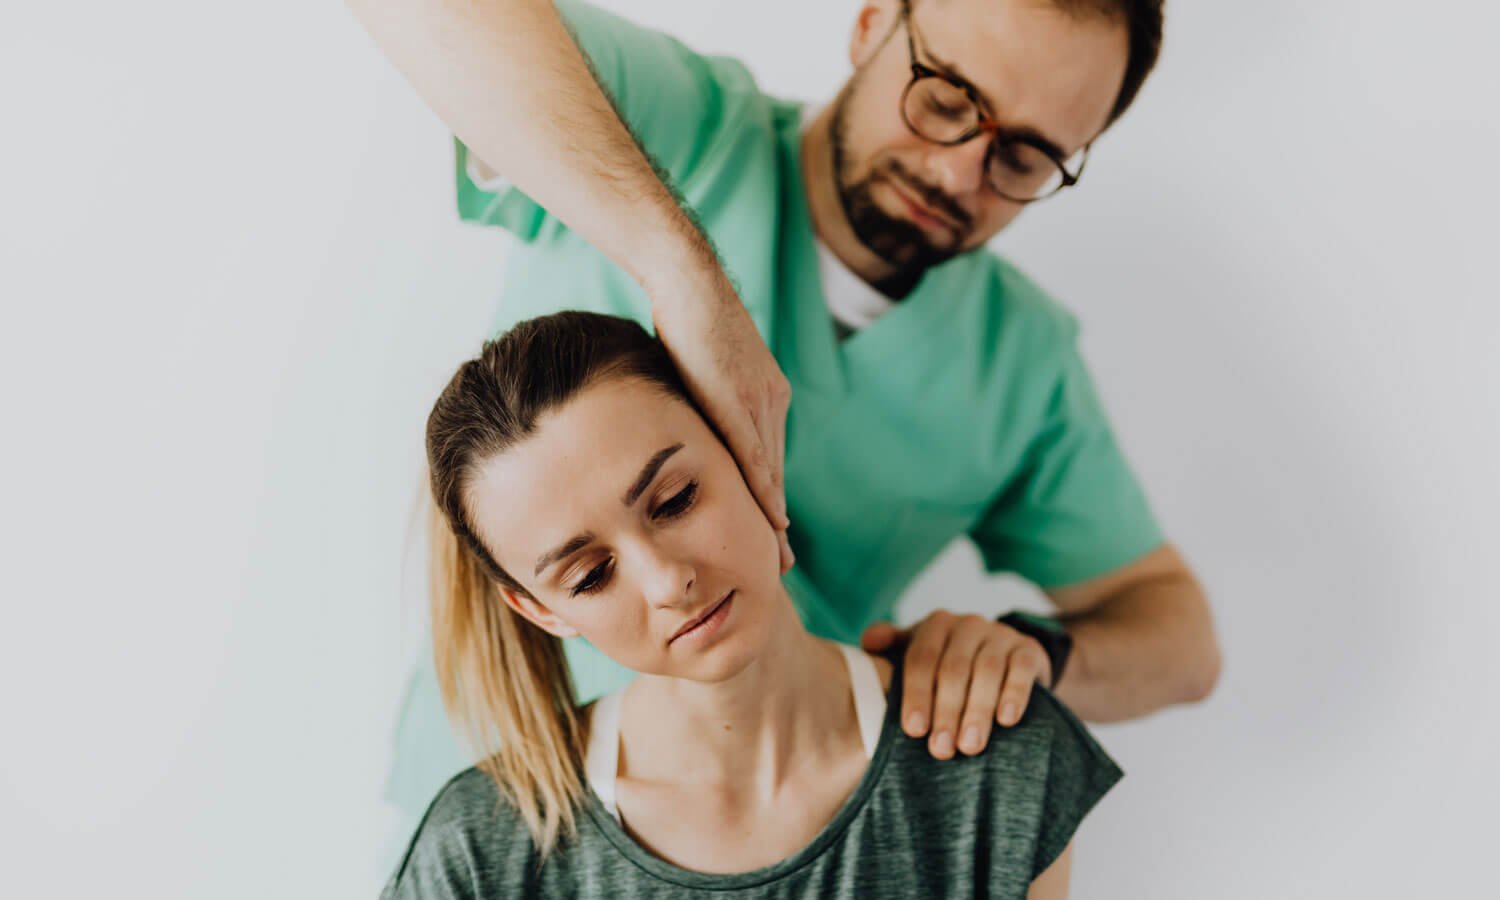 A woman having her neck treated by a rehabilitation specialist.